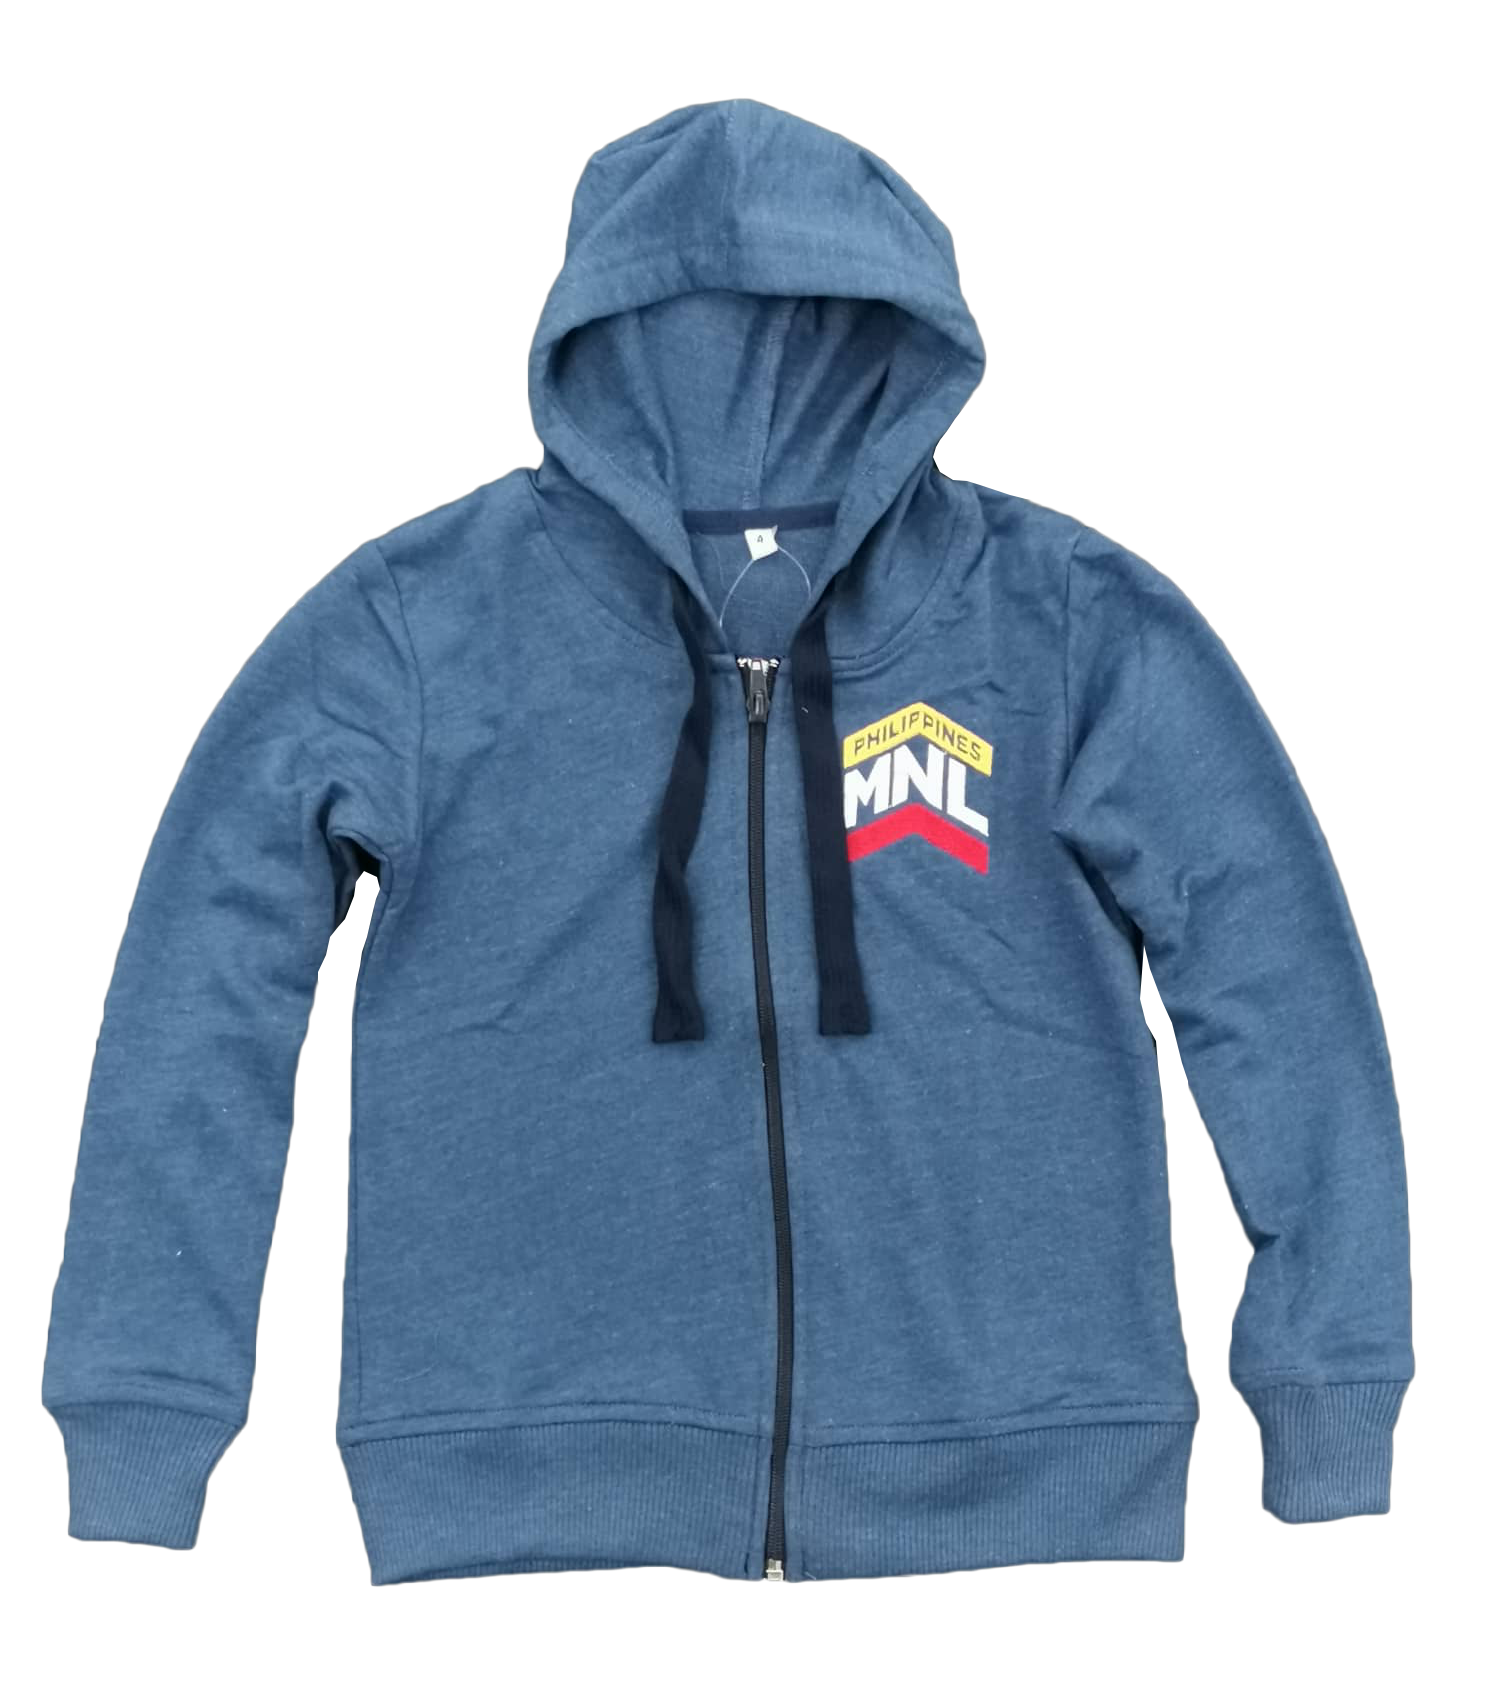 MNL Pullover Hoodie Jacket for Kids